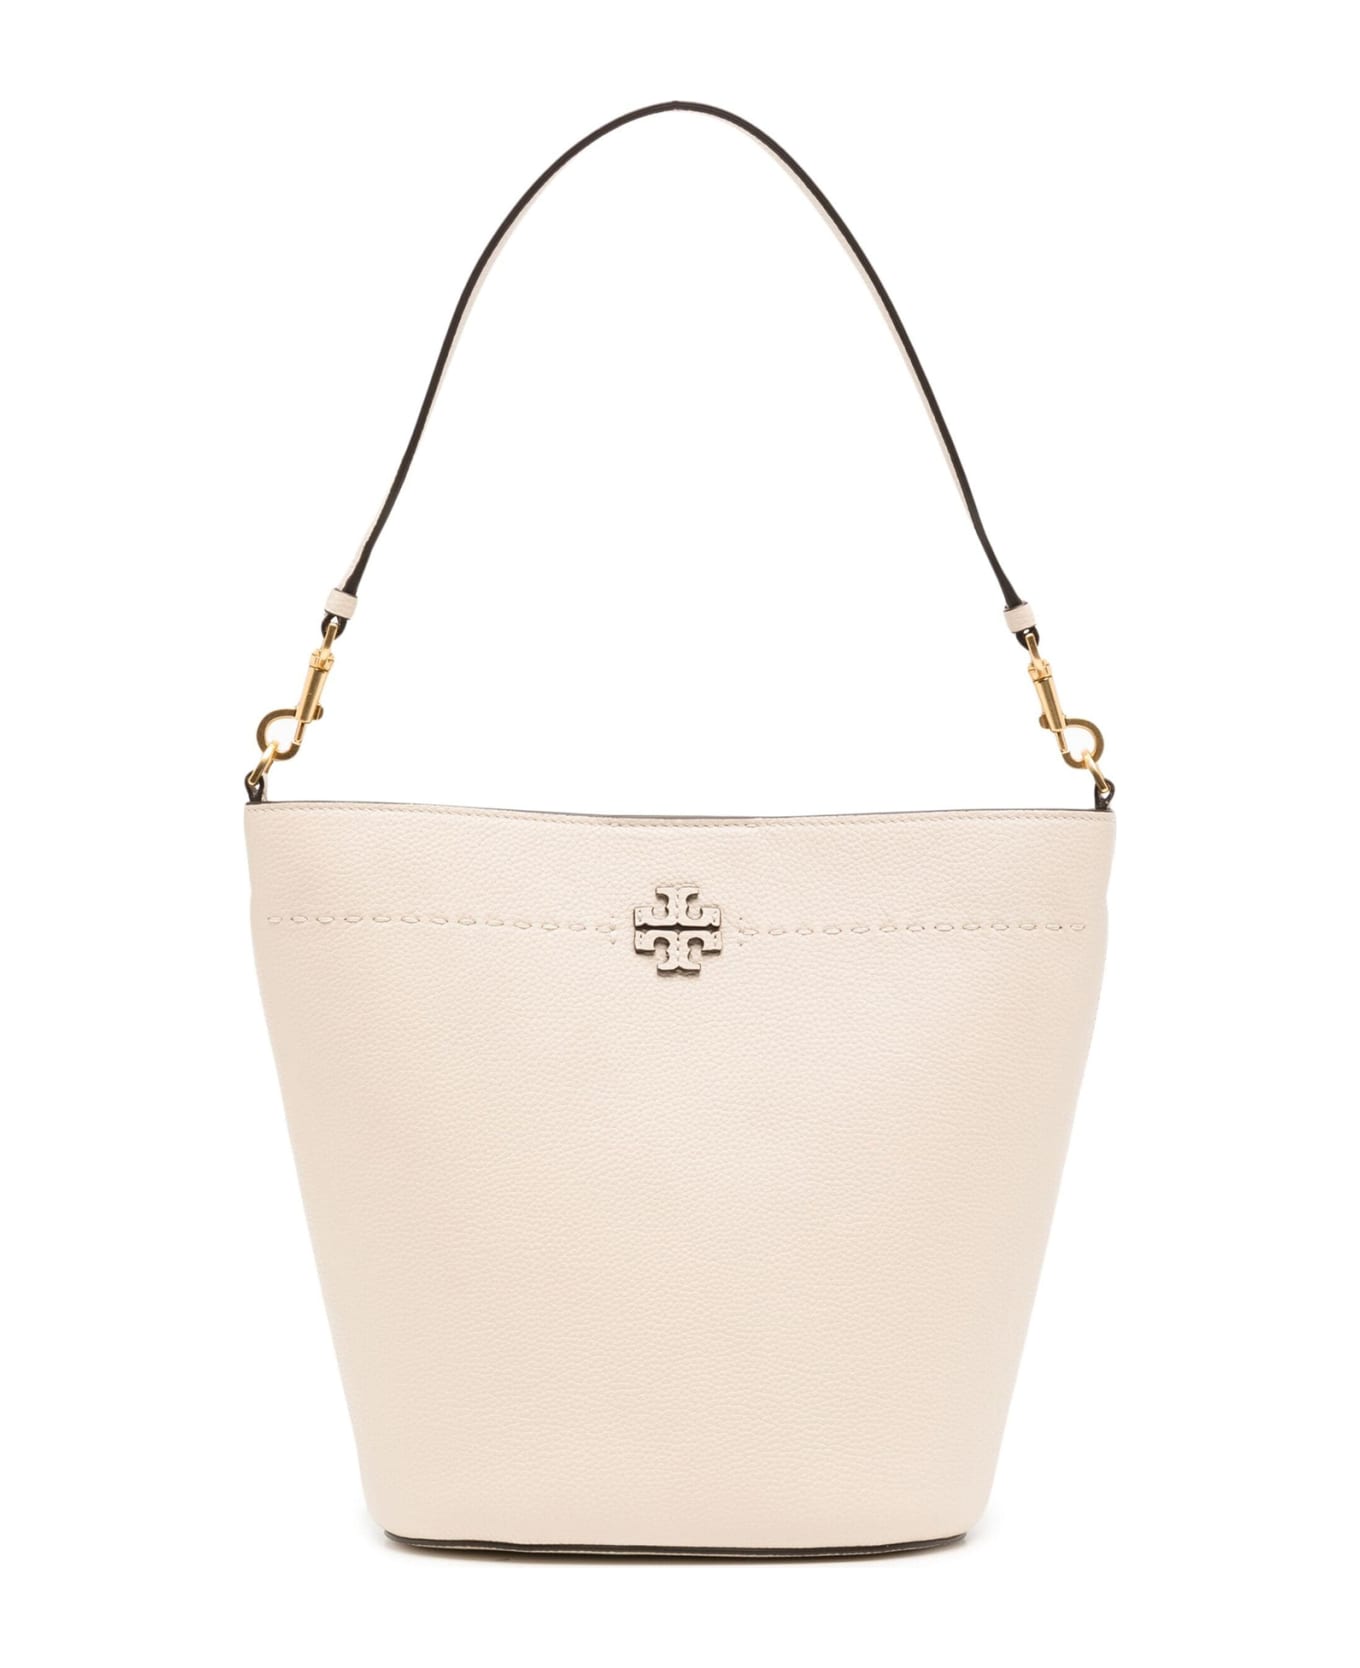 Tory Burch Mcgraw Leather Bucket Bag - BRIE